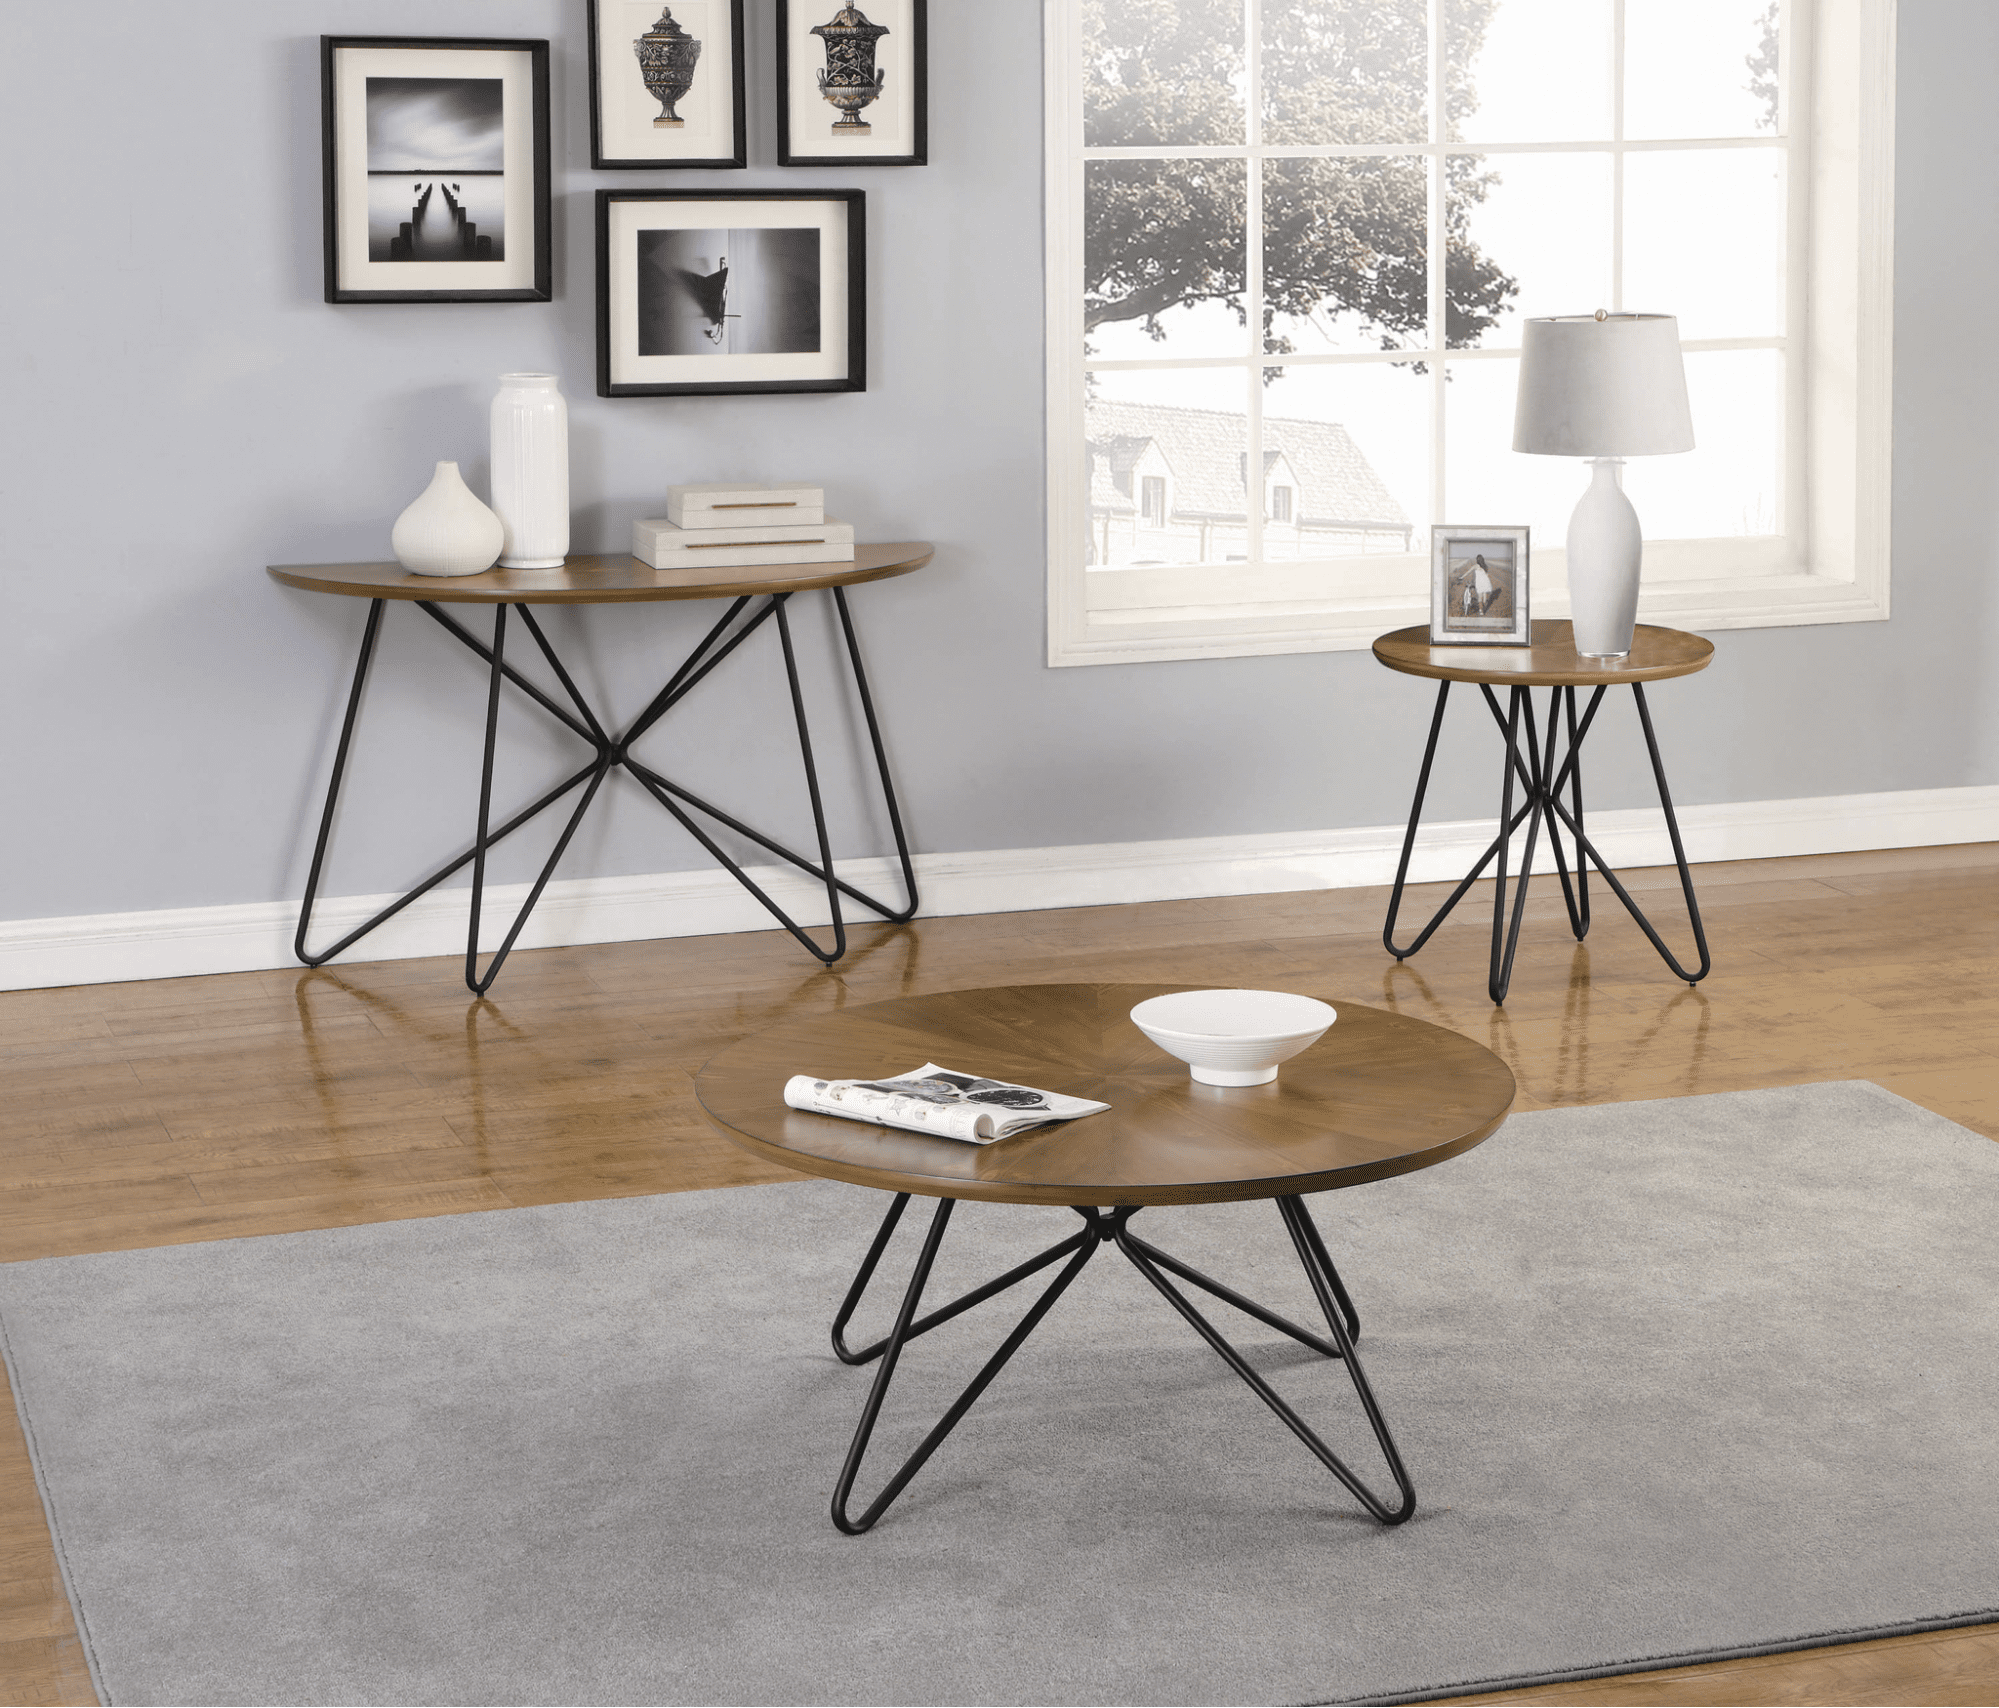 11 Round Coffee Tables To Bring Your Home Decor Full Circle Within Round Coffee Tables With Steel Frames (View 15 of 15)